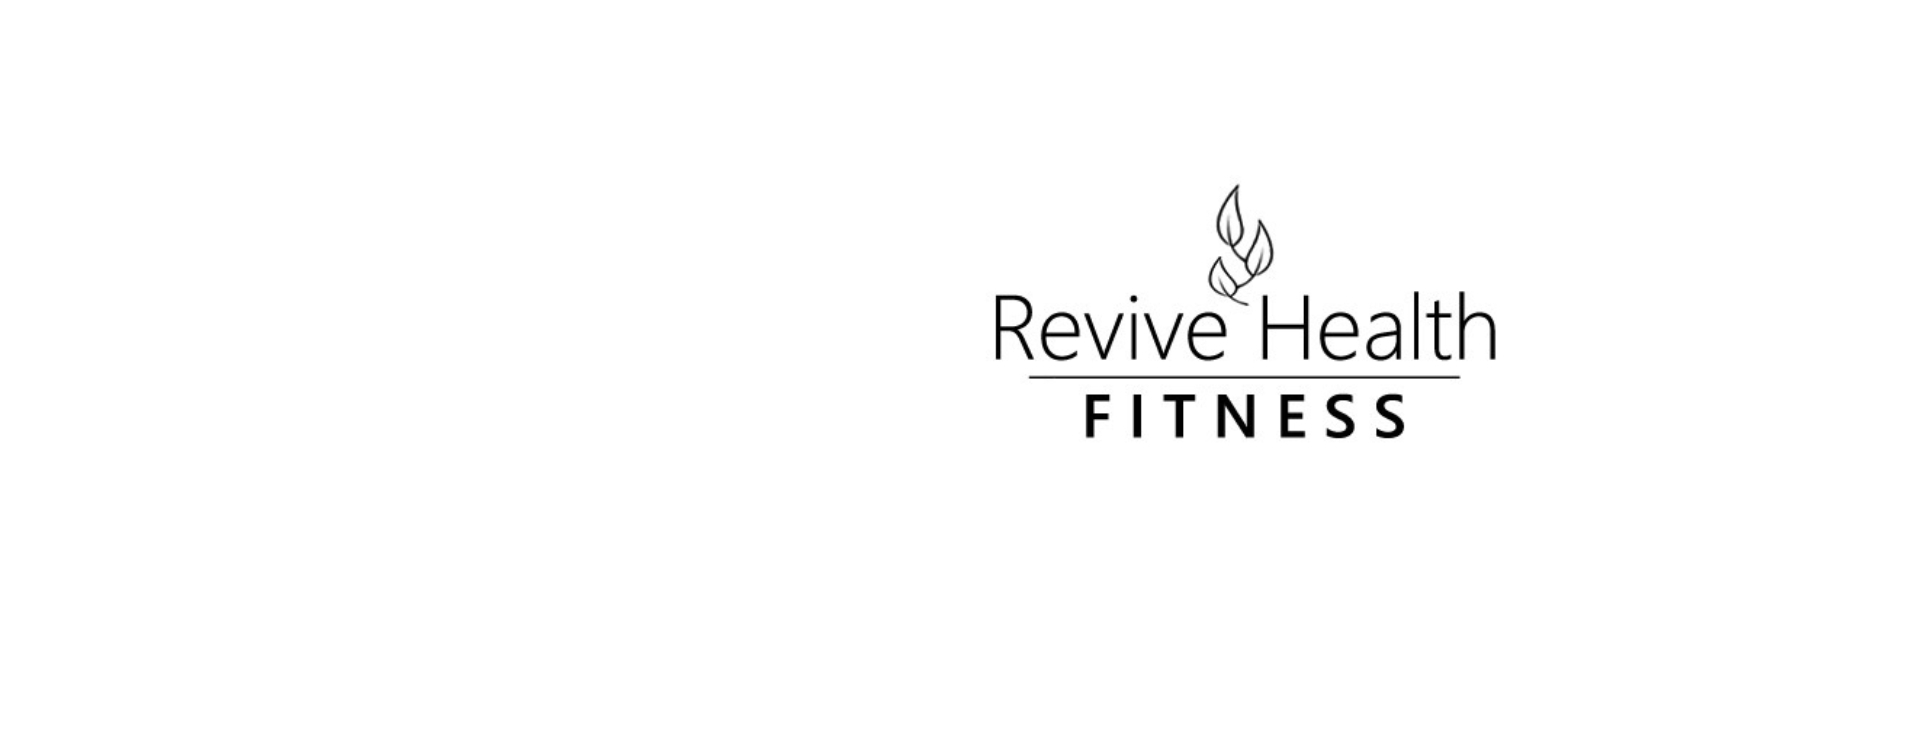 Revive Health Fitness Net Walking Events